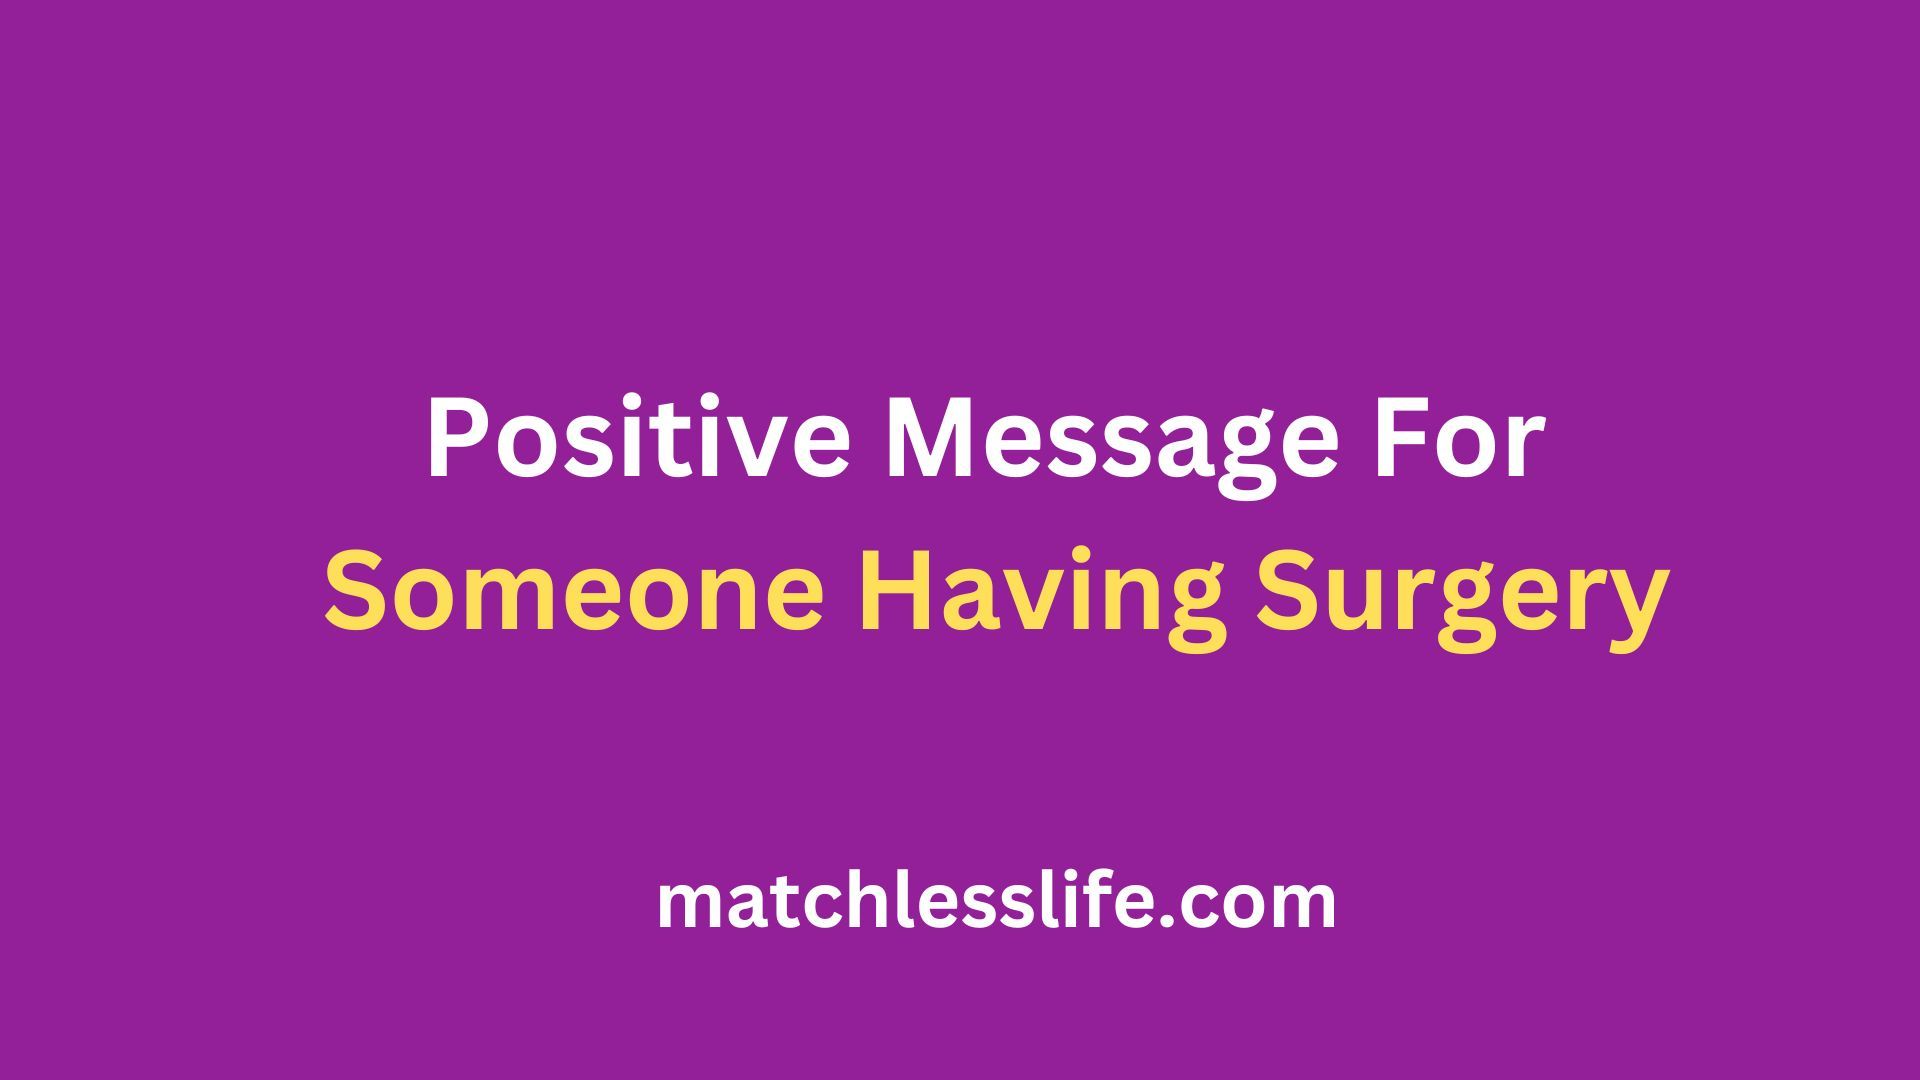 Positive Message For Someone Having Surgery